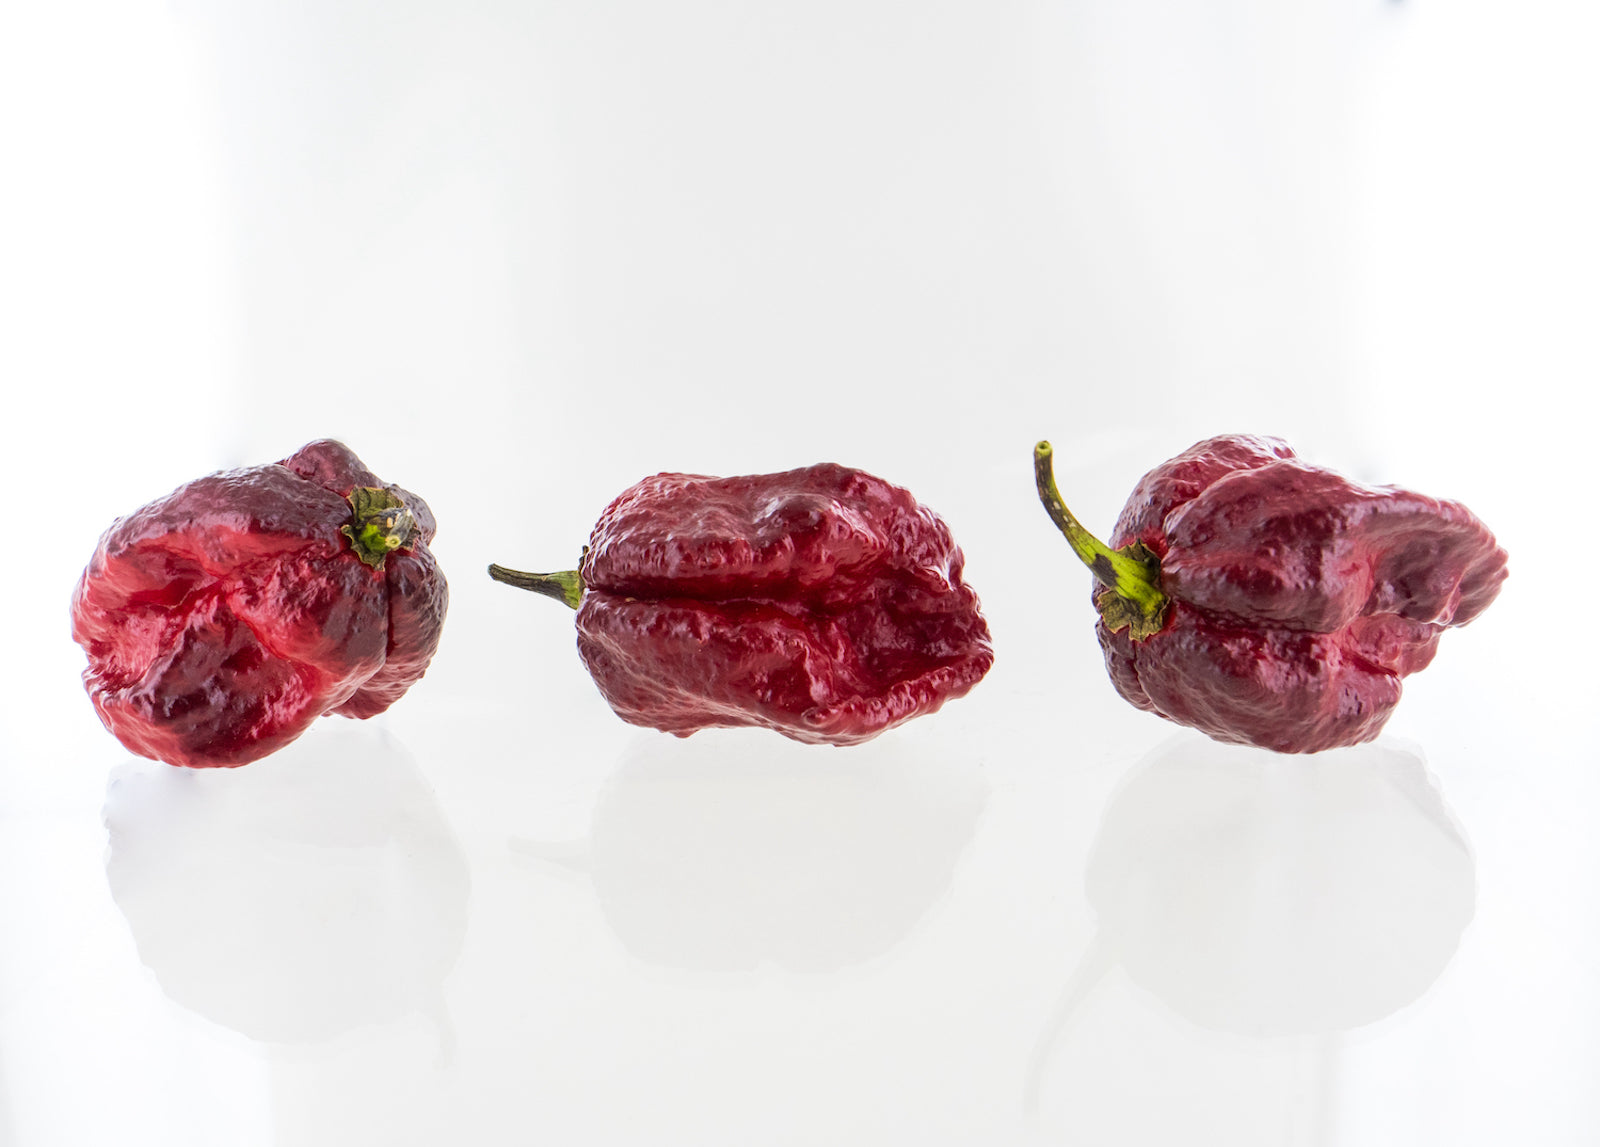 Pepper Joe's Orion chili seeds - three Orion peppers on white background